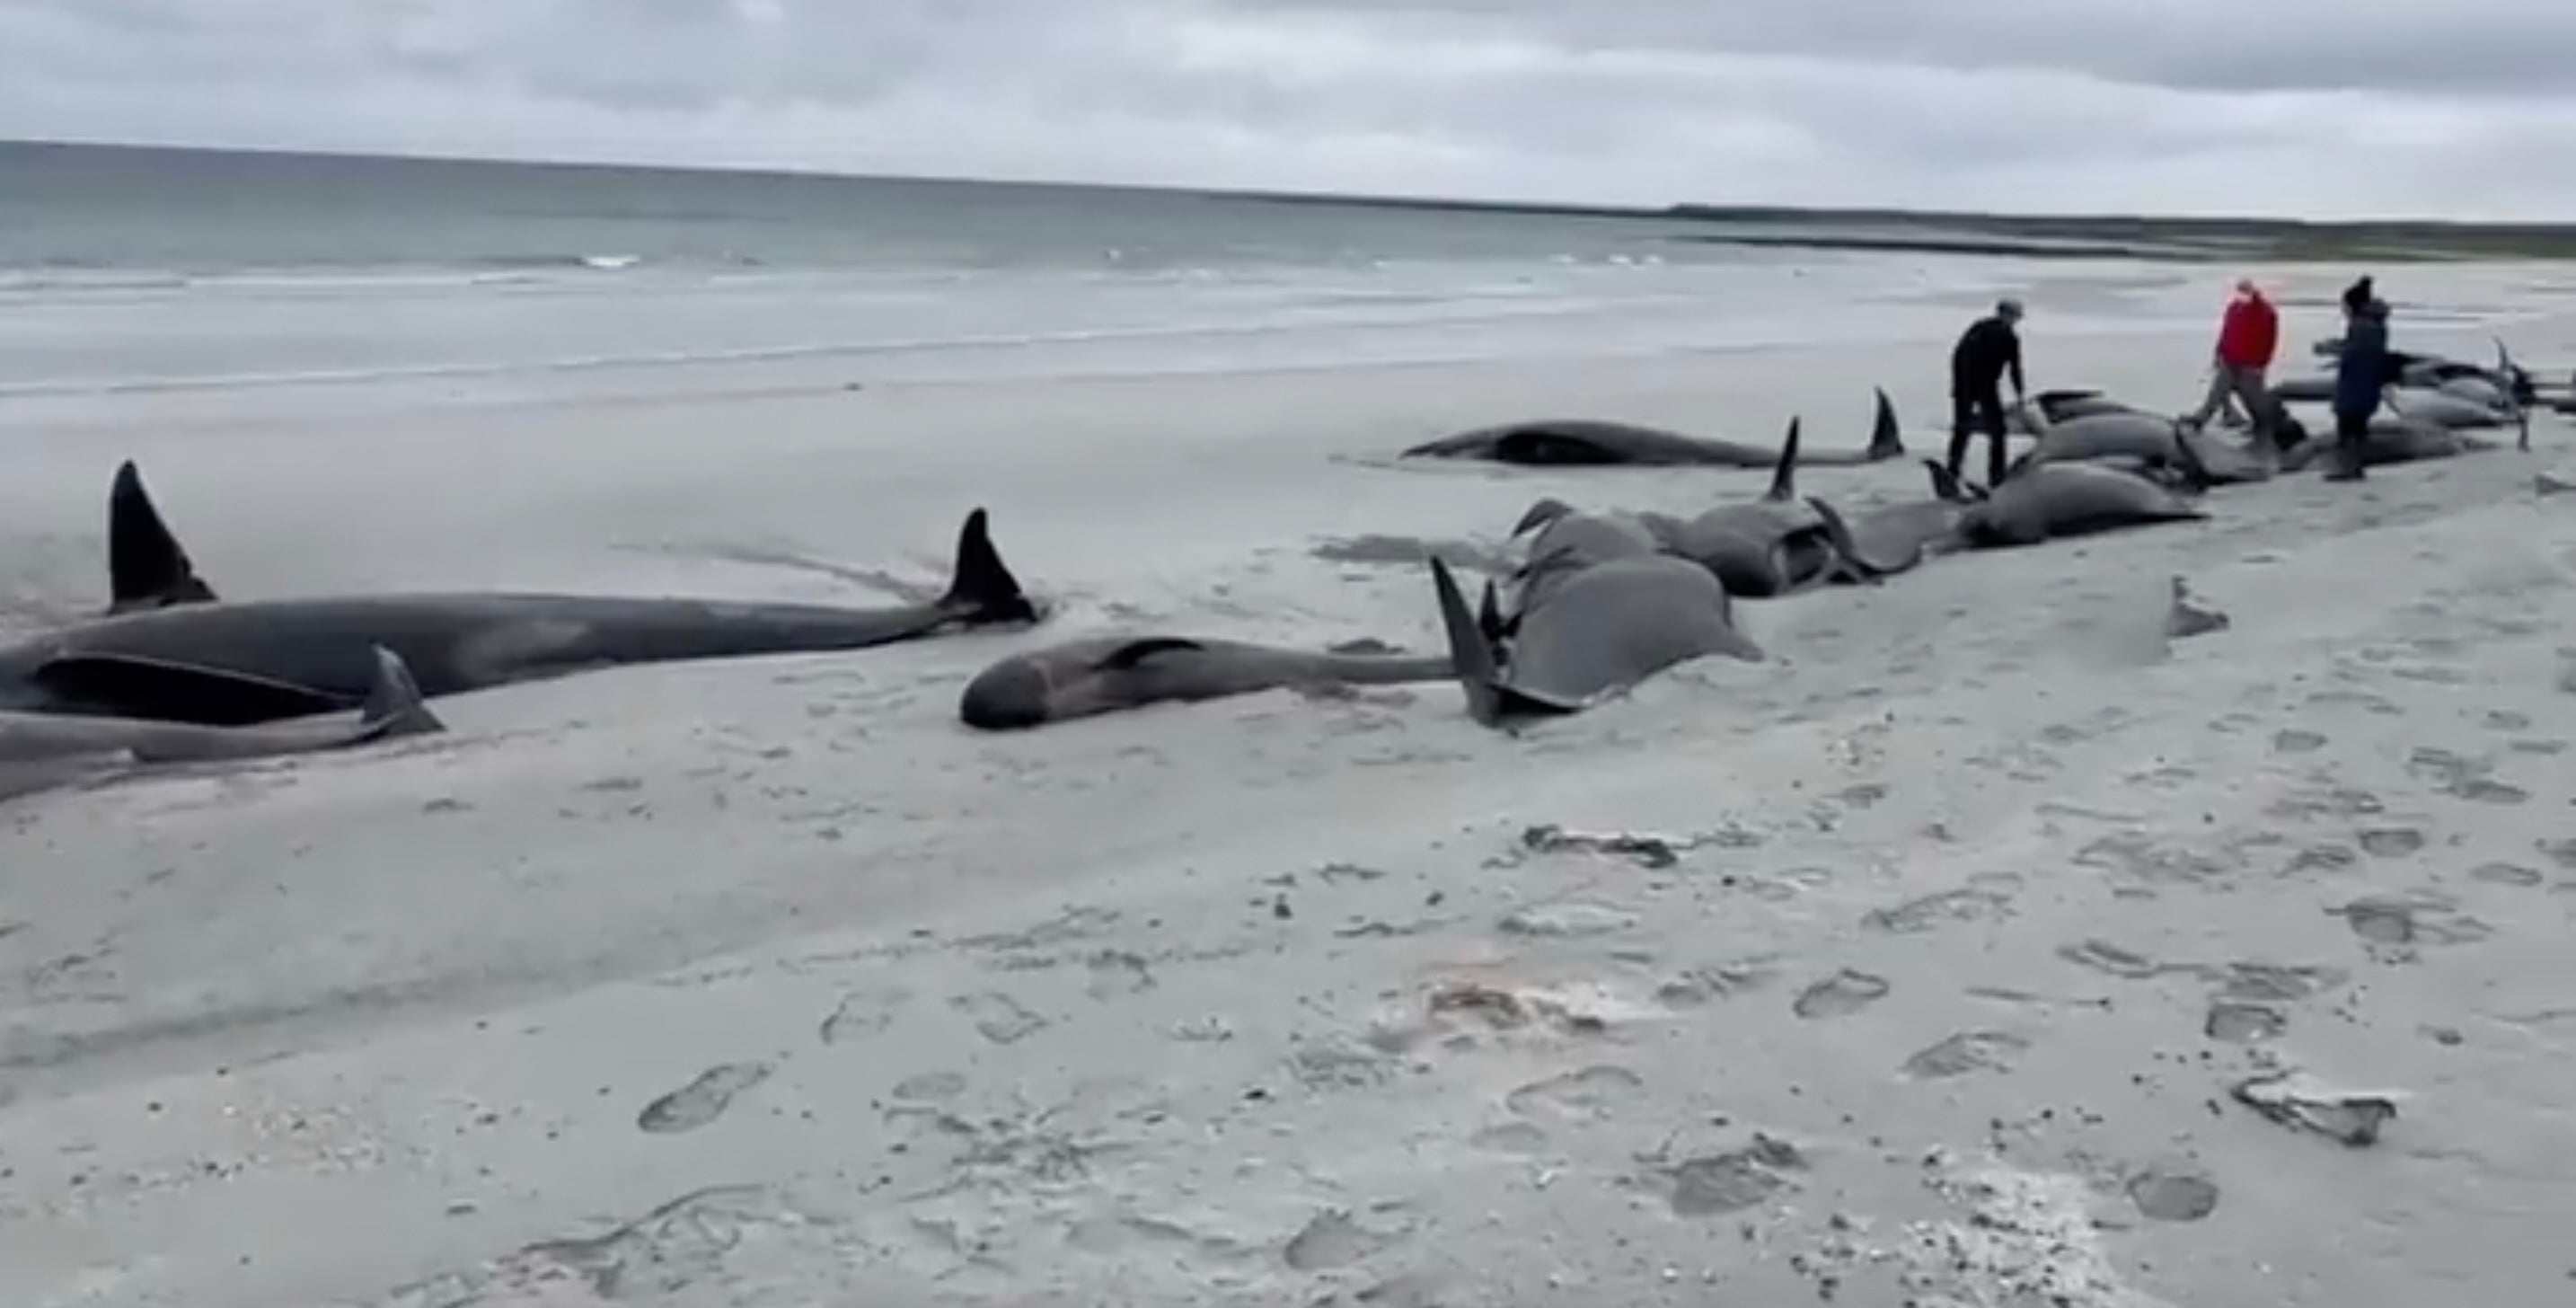 At least 65 long-finned pilot whales died after 77 were washed ashore on an island off the north coast of Scotland, a rescue charity says